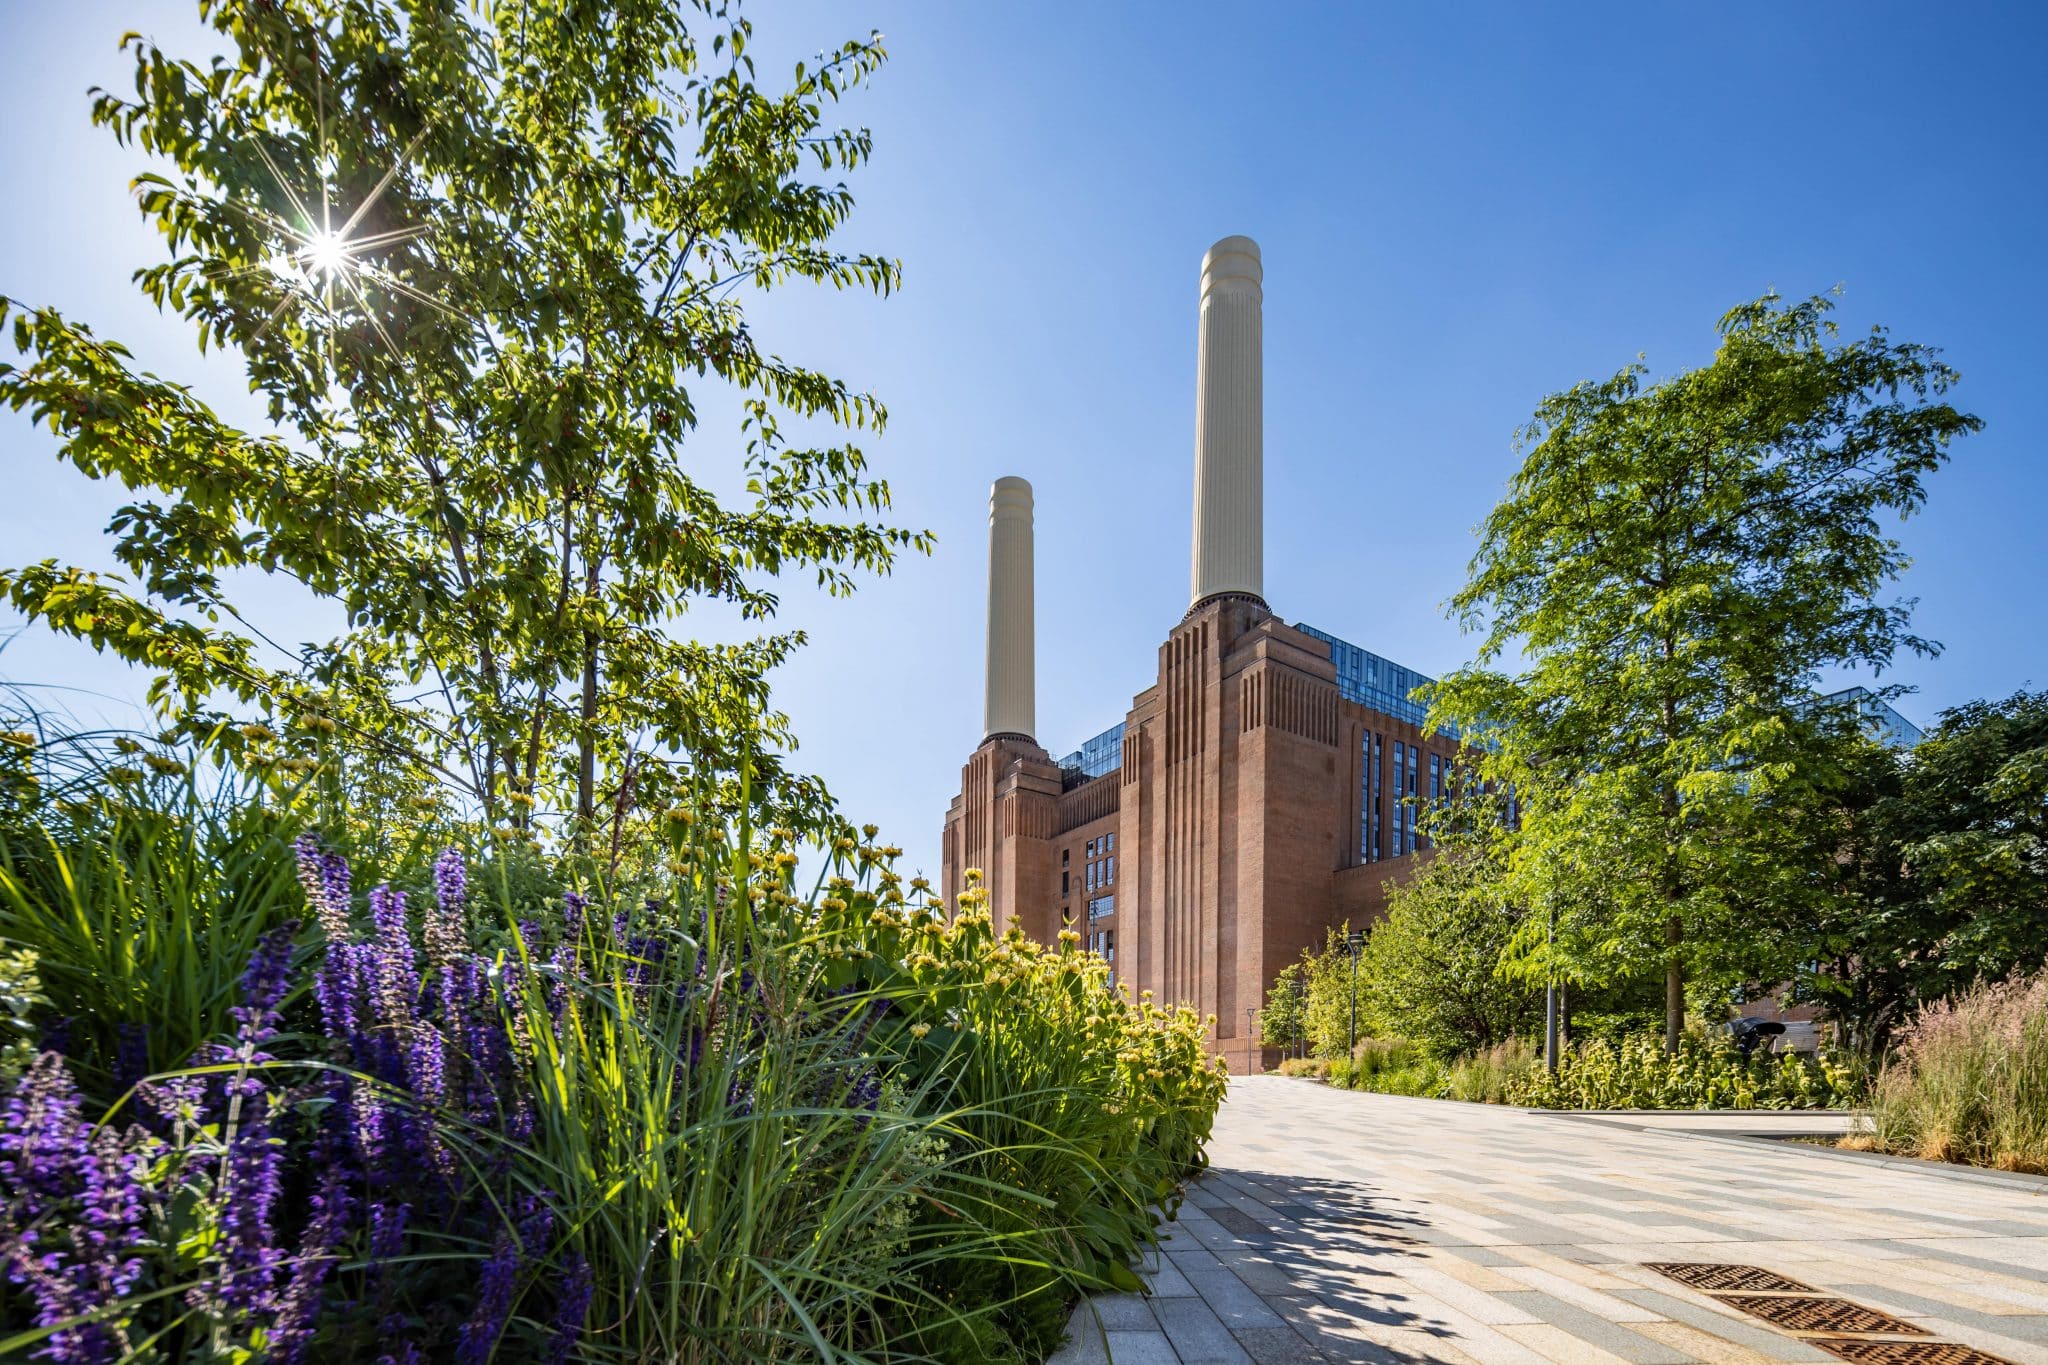 The exterior of Battersea Power Station, with some flowering plants in the foreground